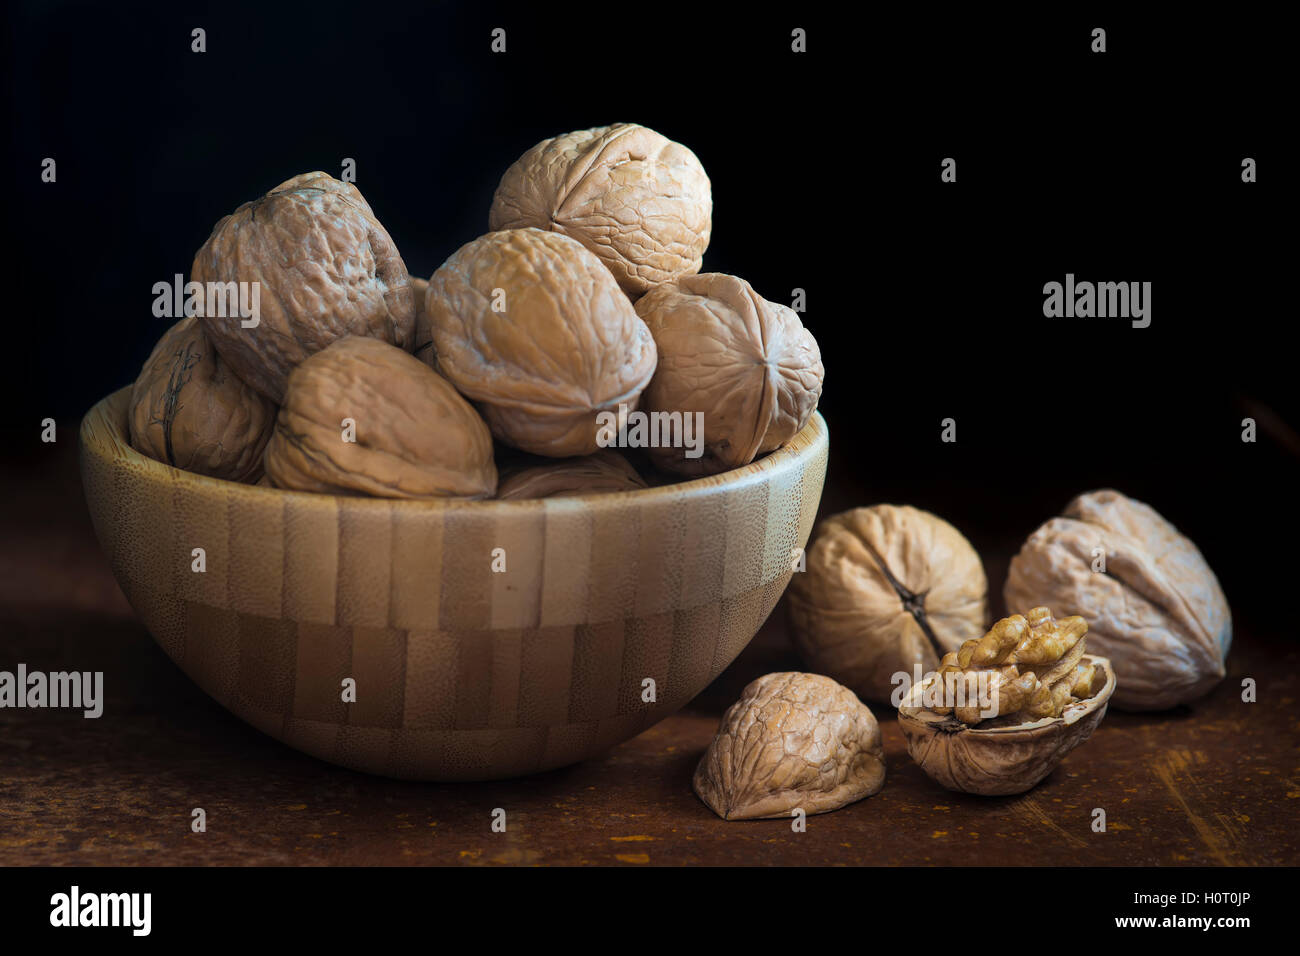 Wooden bowl with walnuts on a dark background Stock Photo